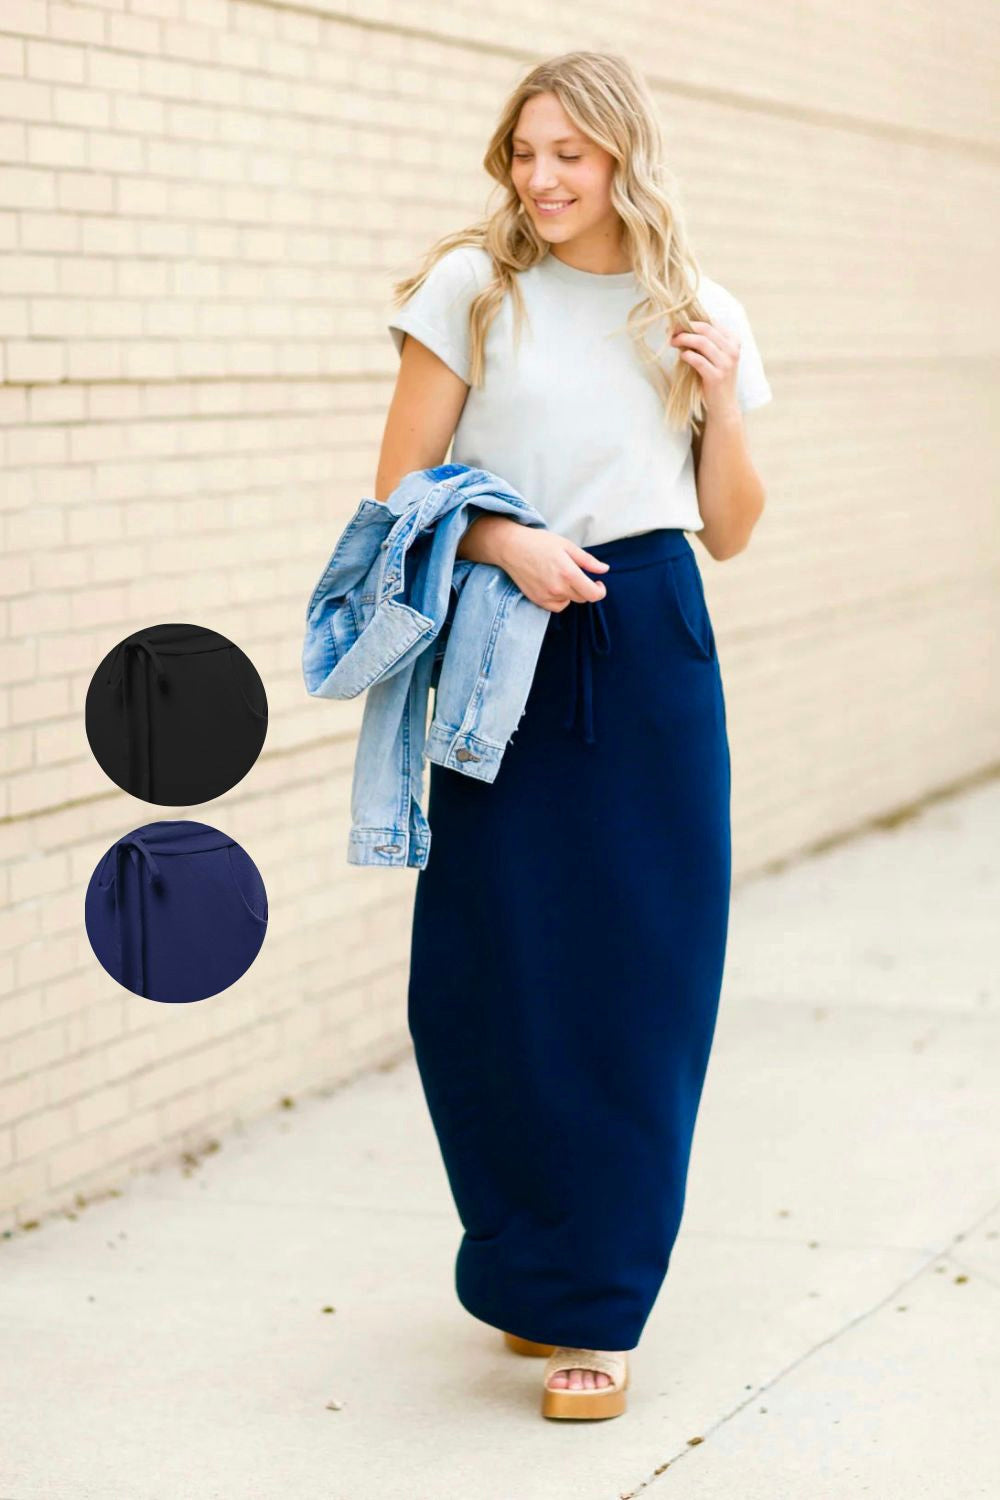 Womens Apparel Clothing maxi skirt full length available in solid black or solid navy blue all sizes Small Medium Large XL 1XL 2XL 3XL Zenana Brand